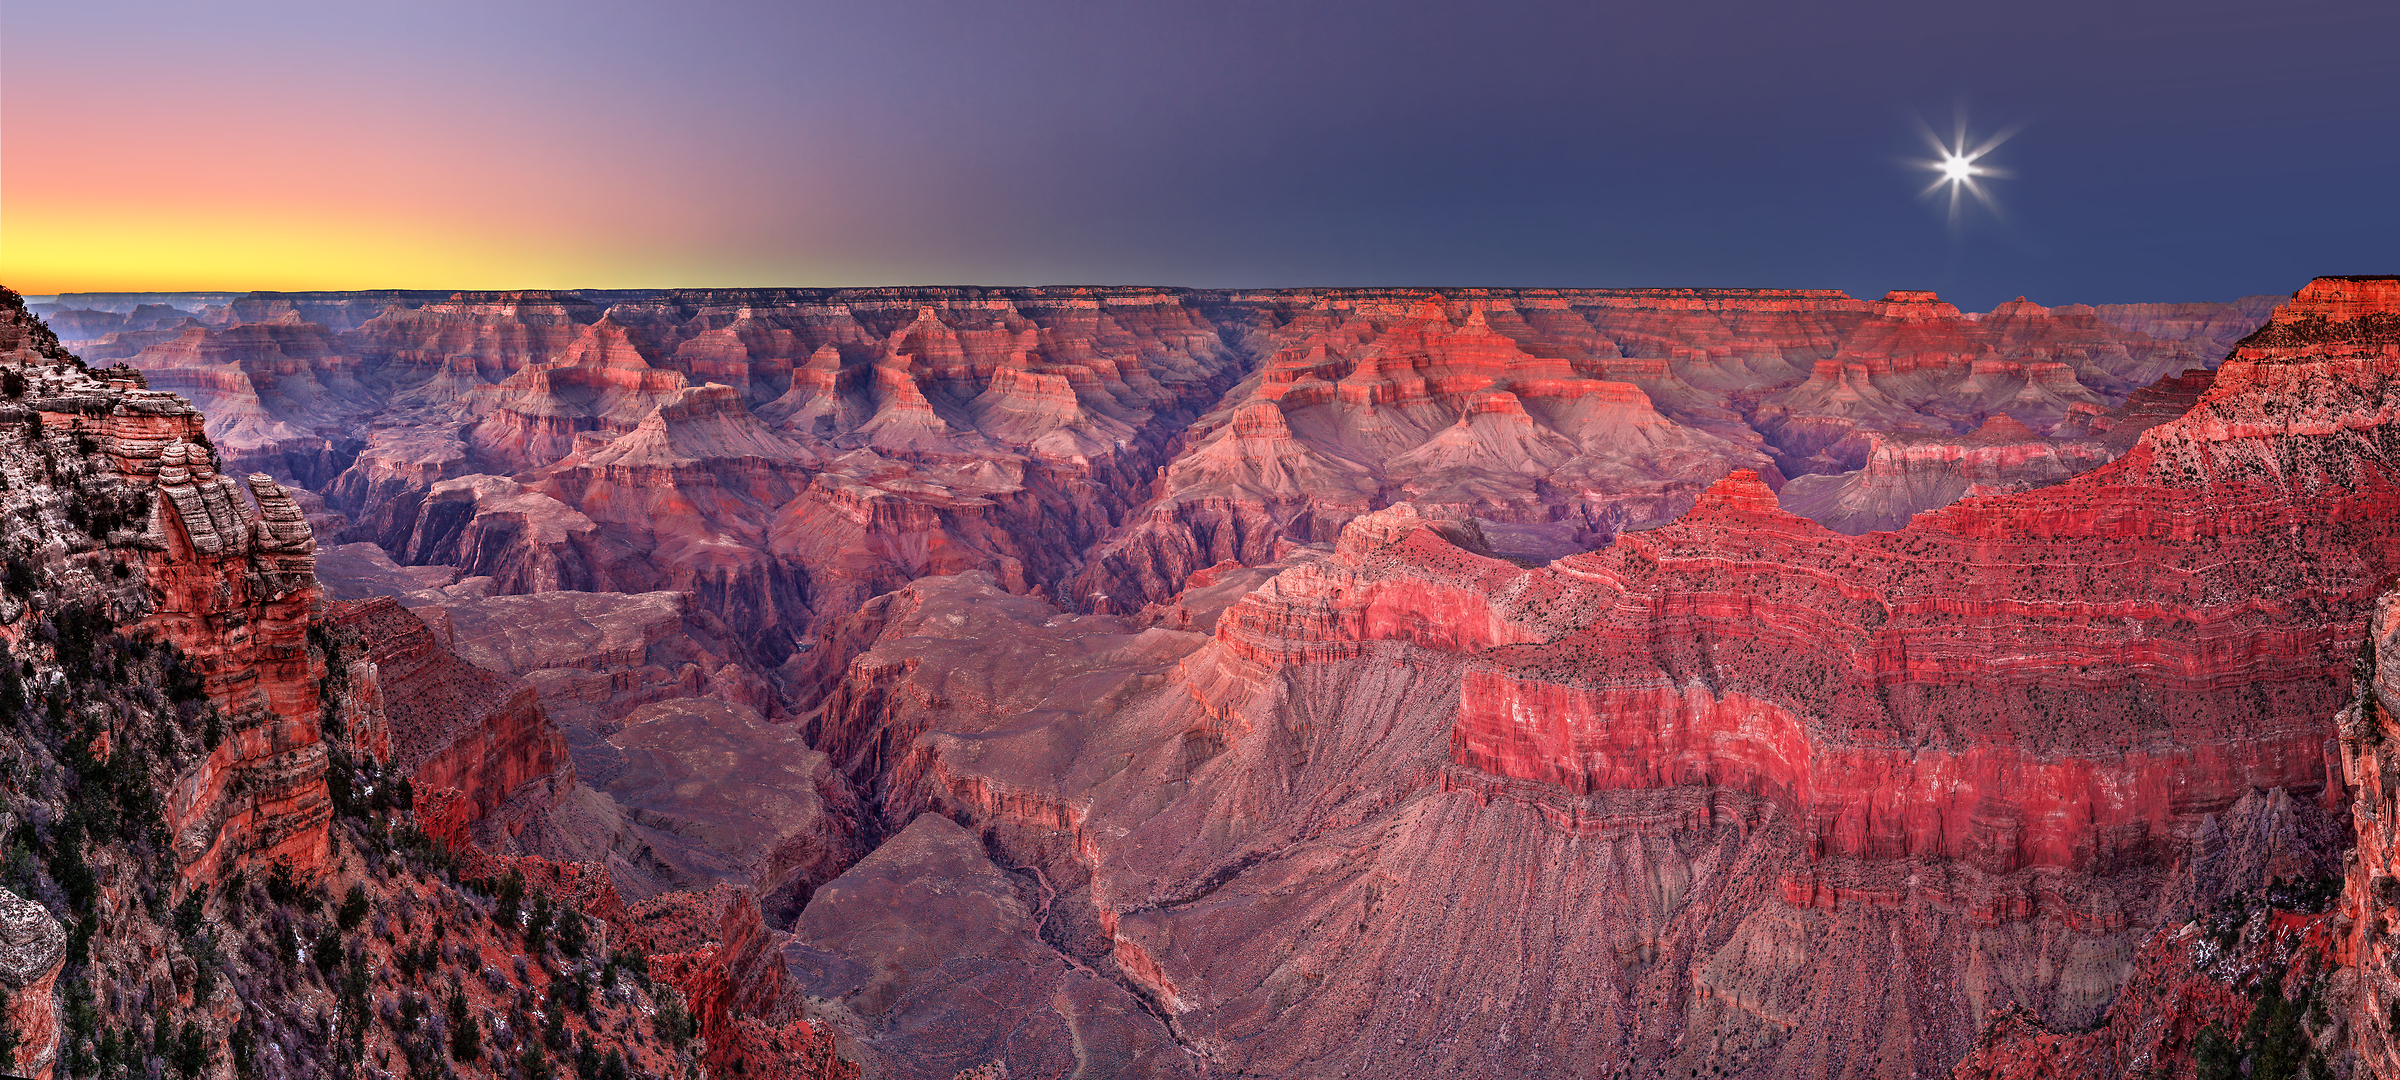 472 megapixels! A very high resolution, large-format VAST photo print of the Grand Canyon at sunset from Mather Point; fine art landscape photo created by Chris Collacott in Grand Canyon National Park, Arizona